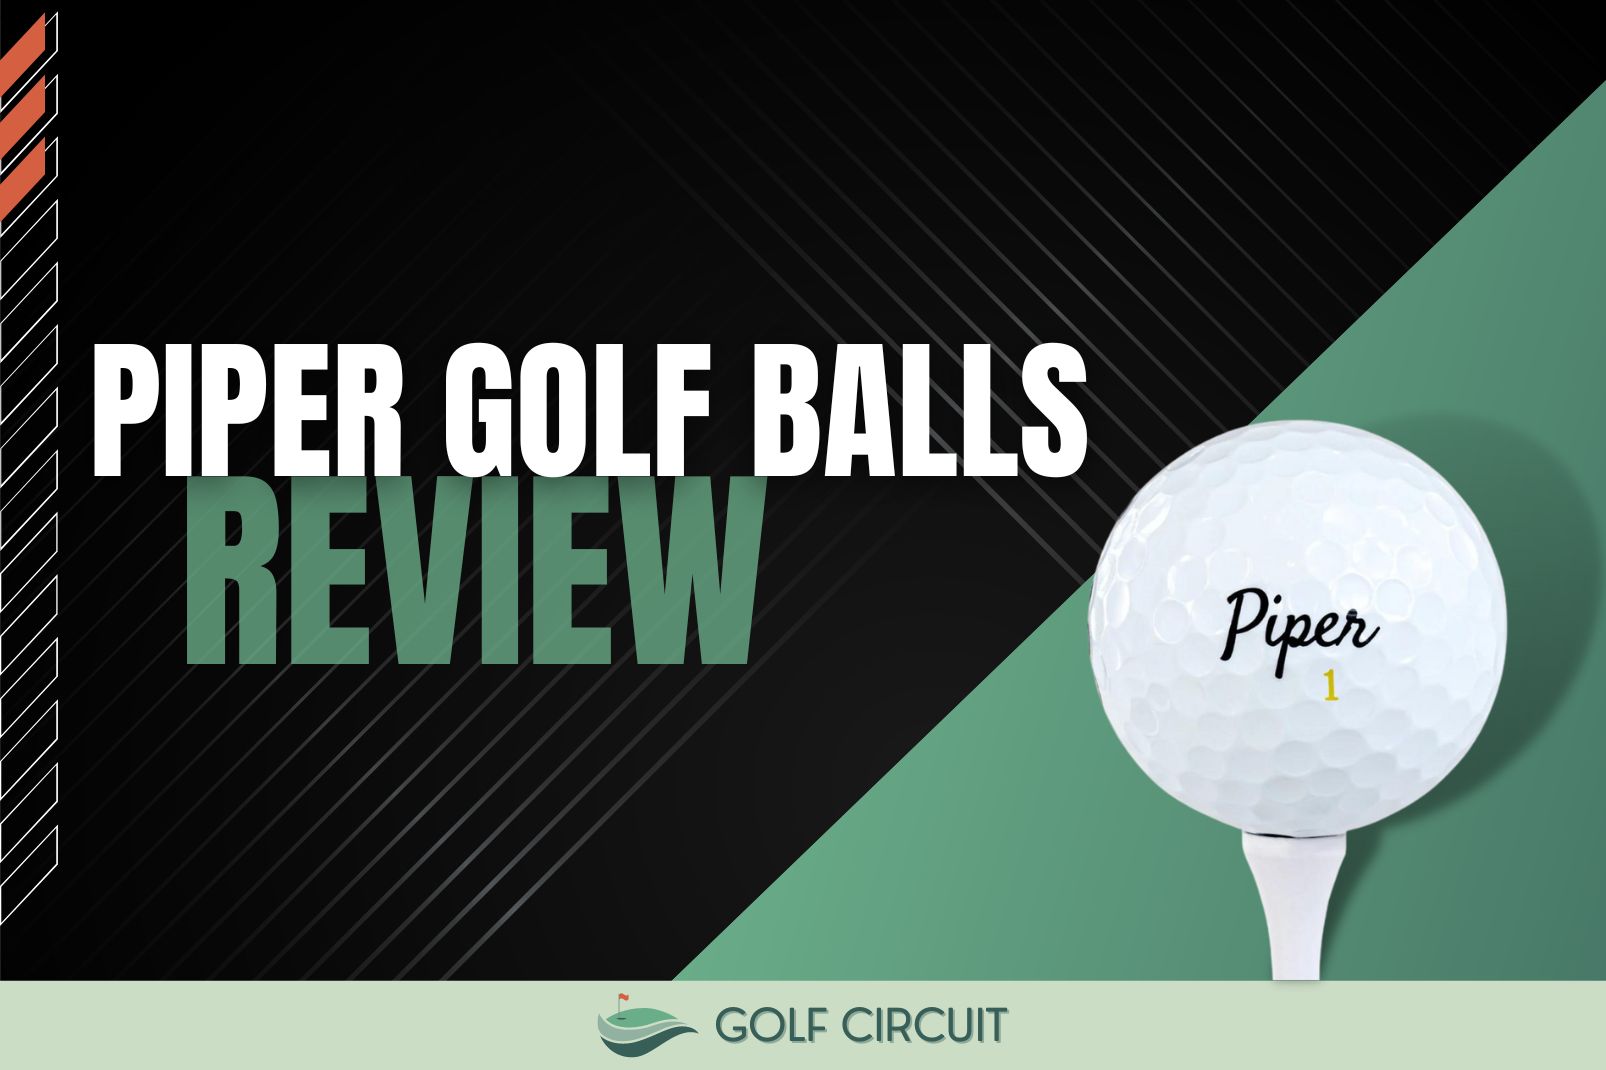 Piper golf ball review